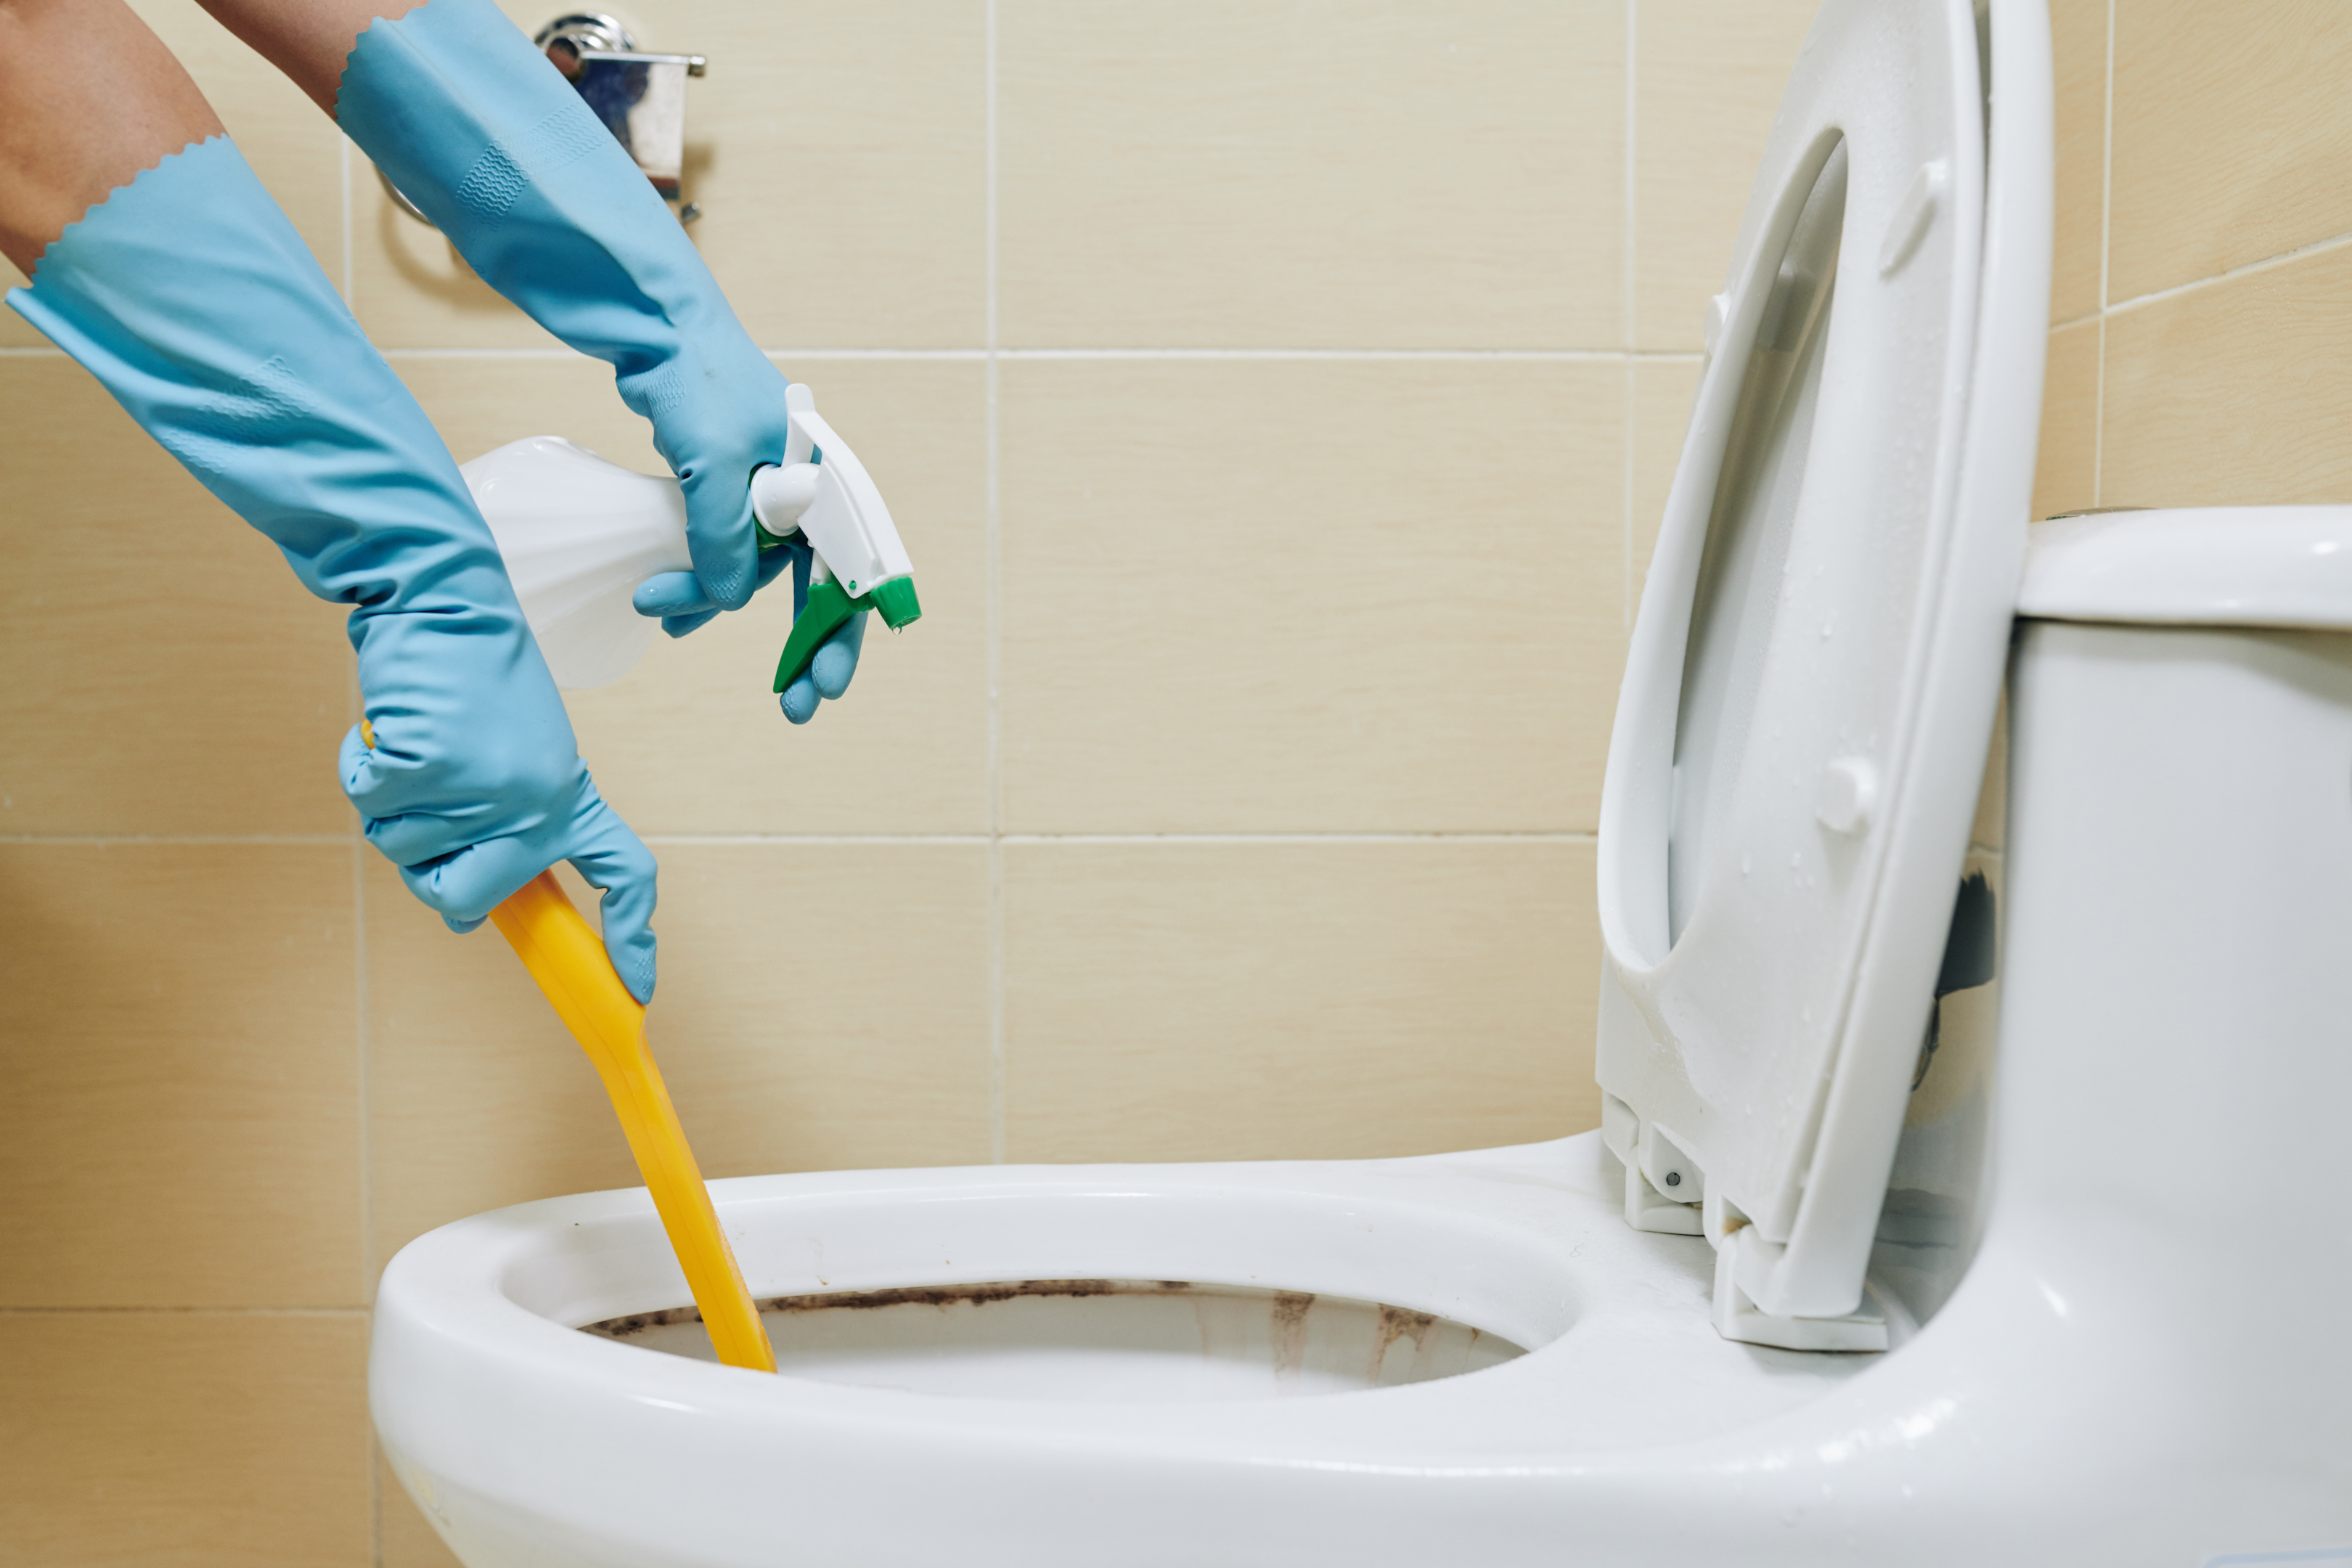 Toilet Bowl Cleaning Hacks: How to Keep Your Toilet Much Cleaner with RainX